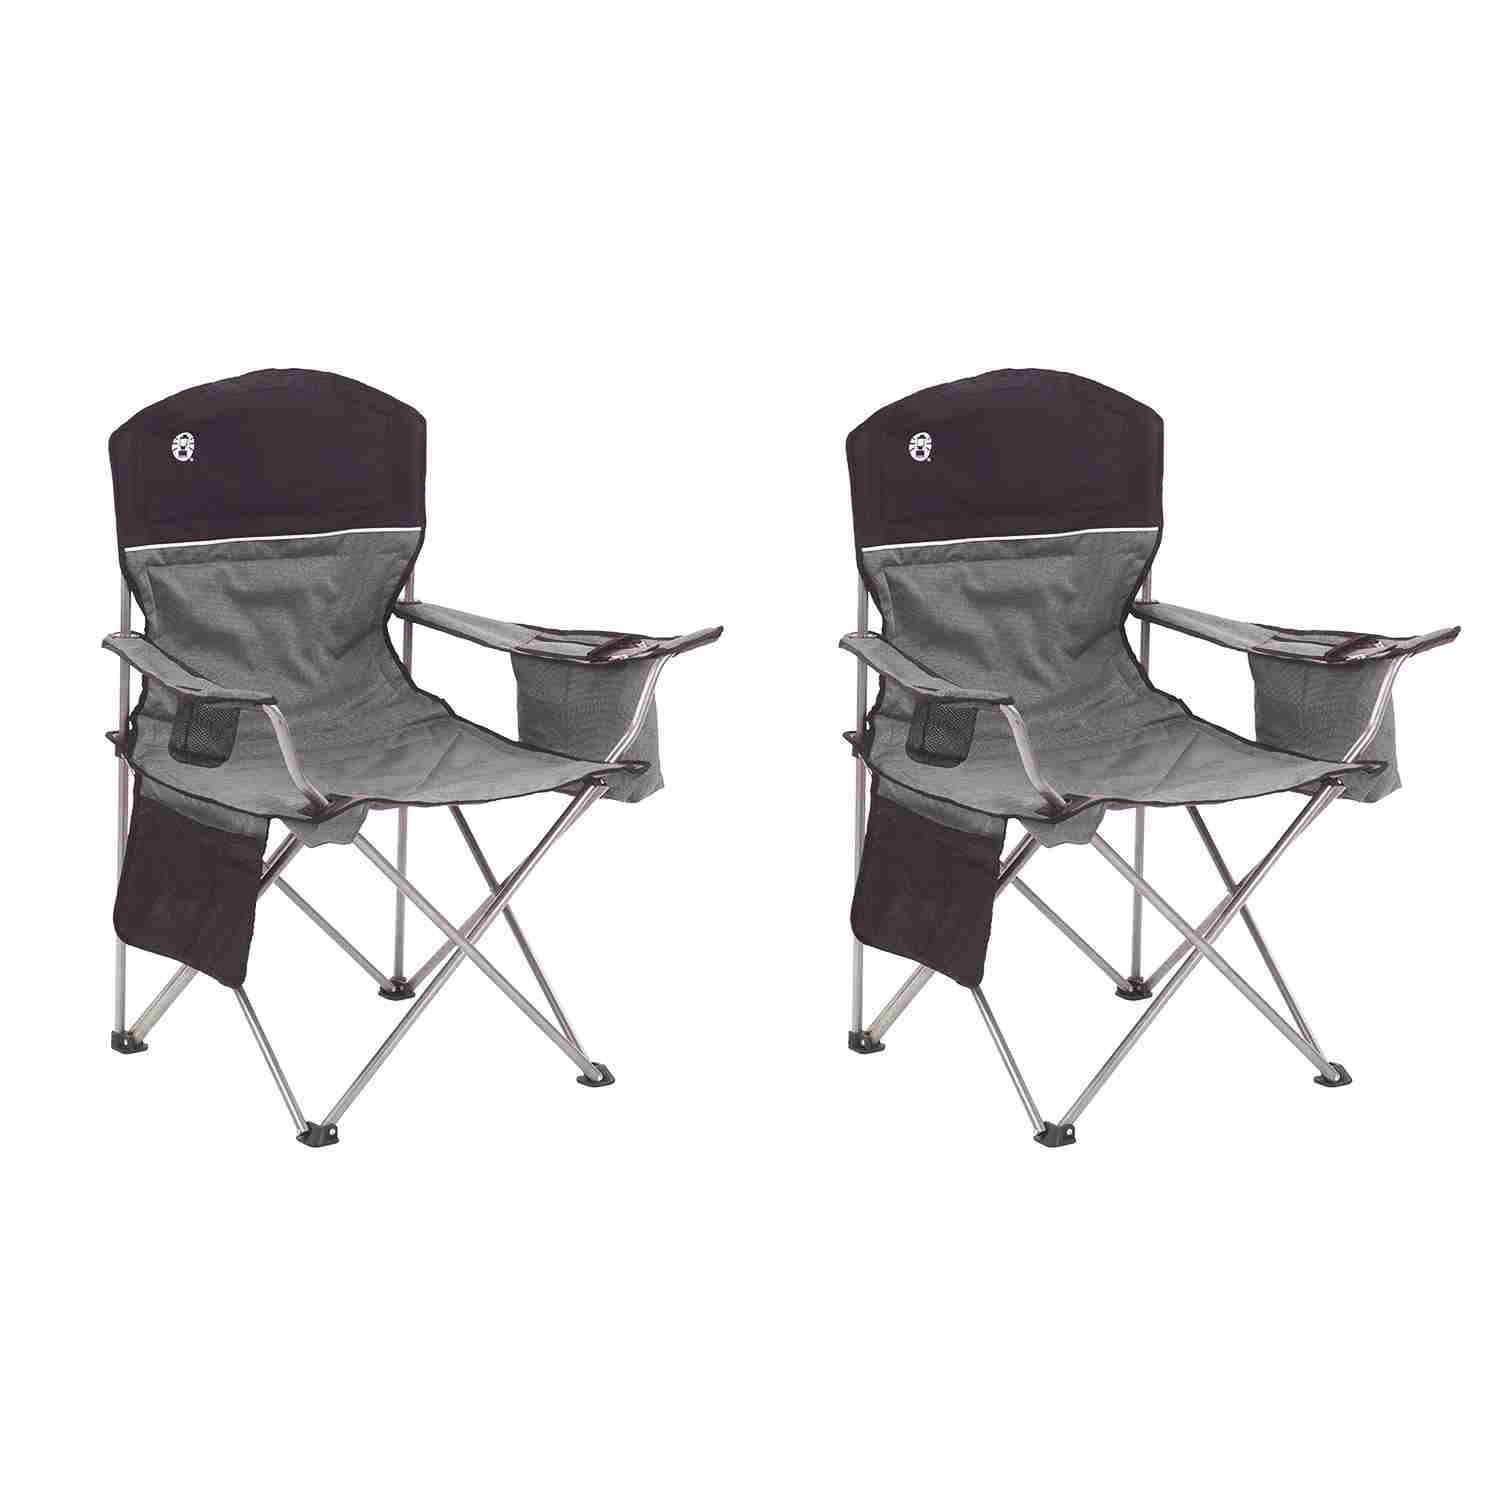 coleman-oversized-awesome-camping-chairs